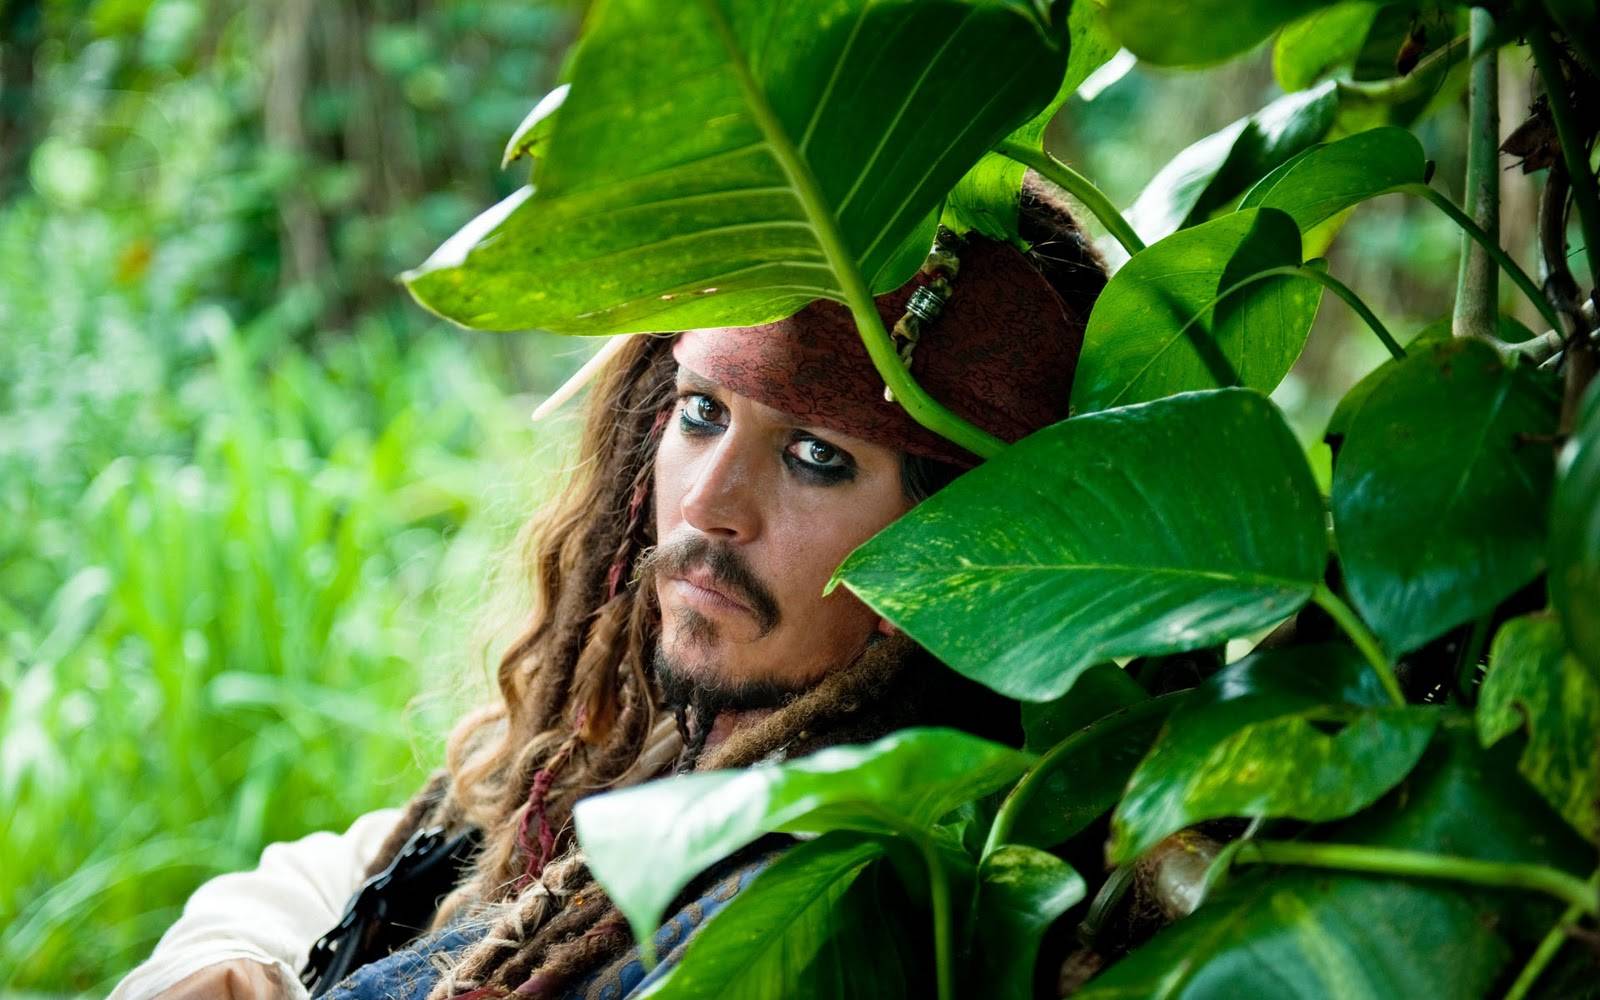 Captain Jack in the jungle